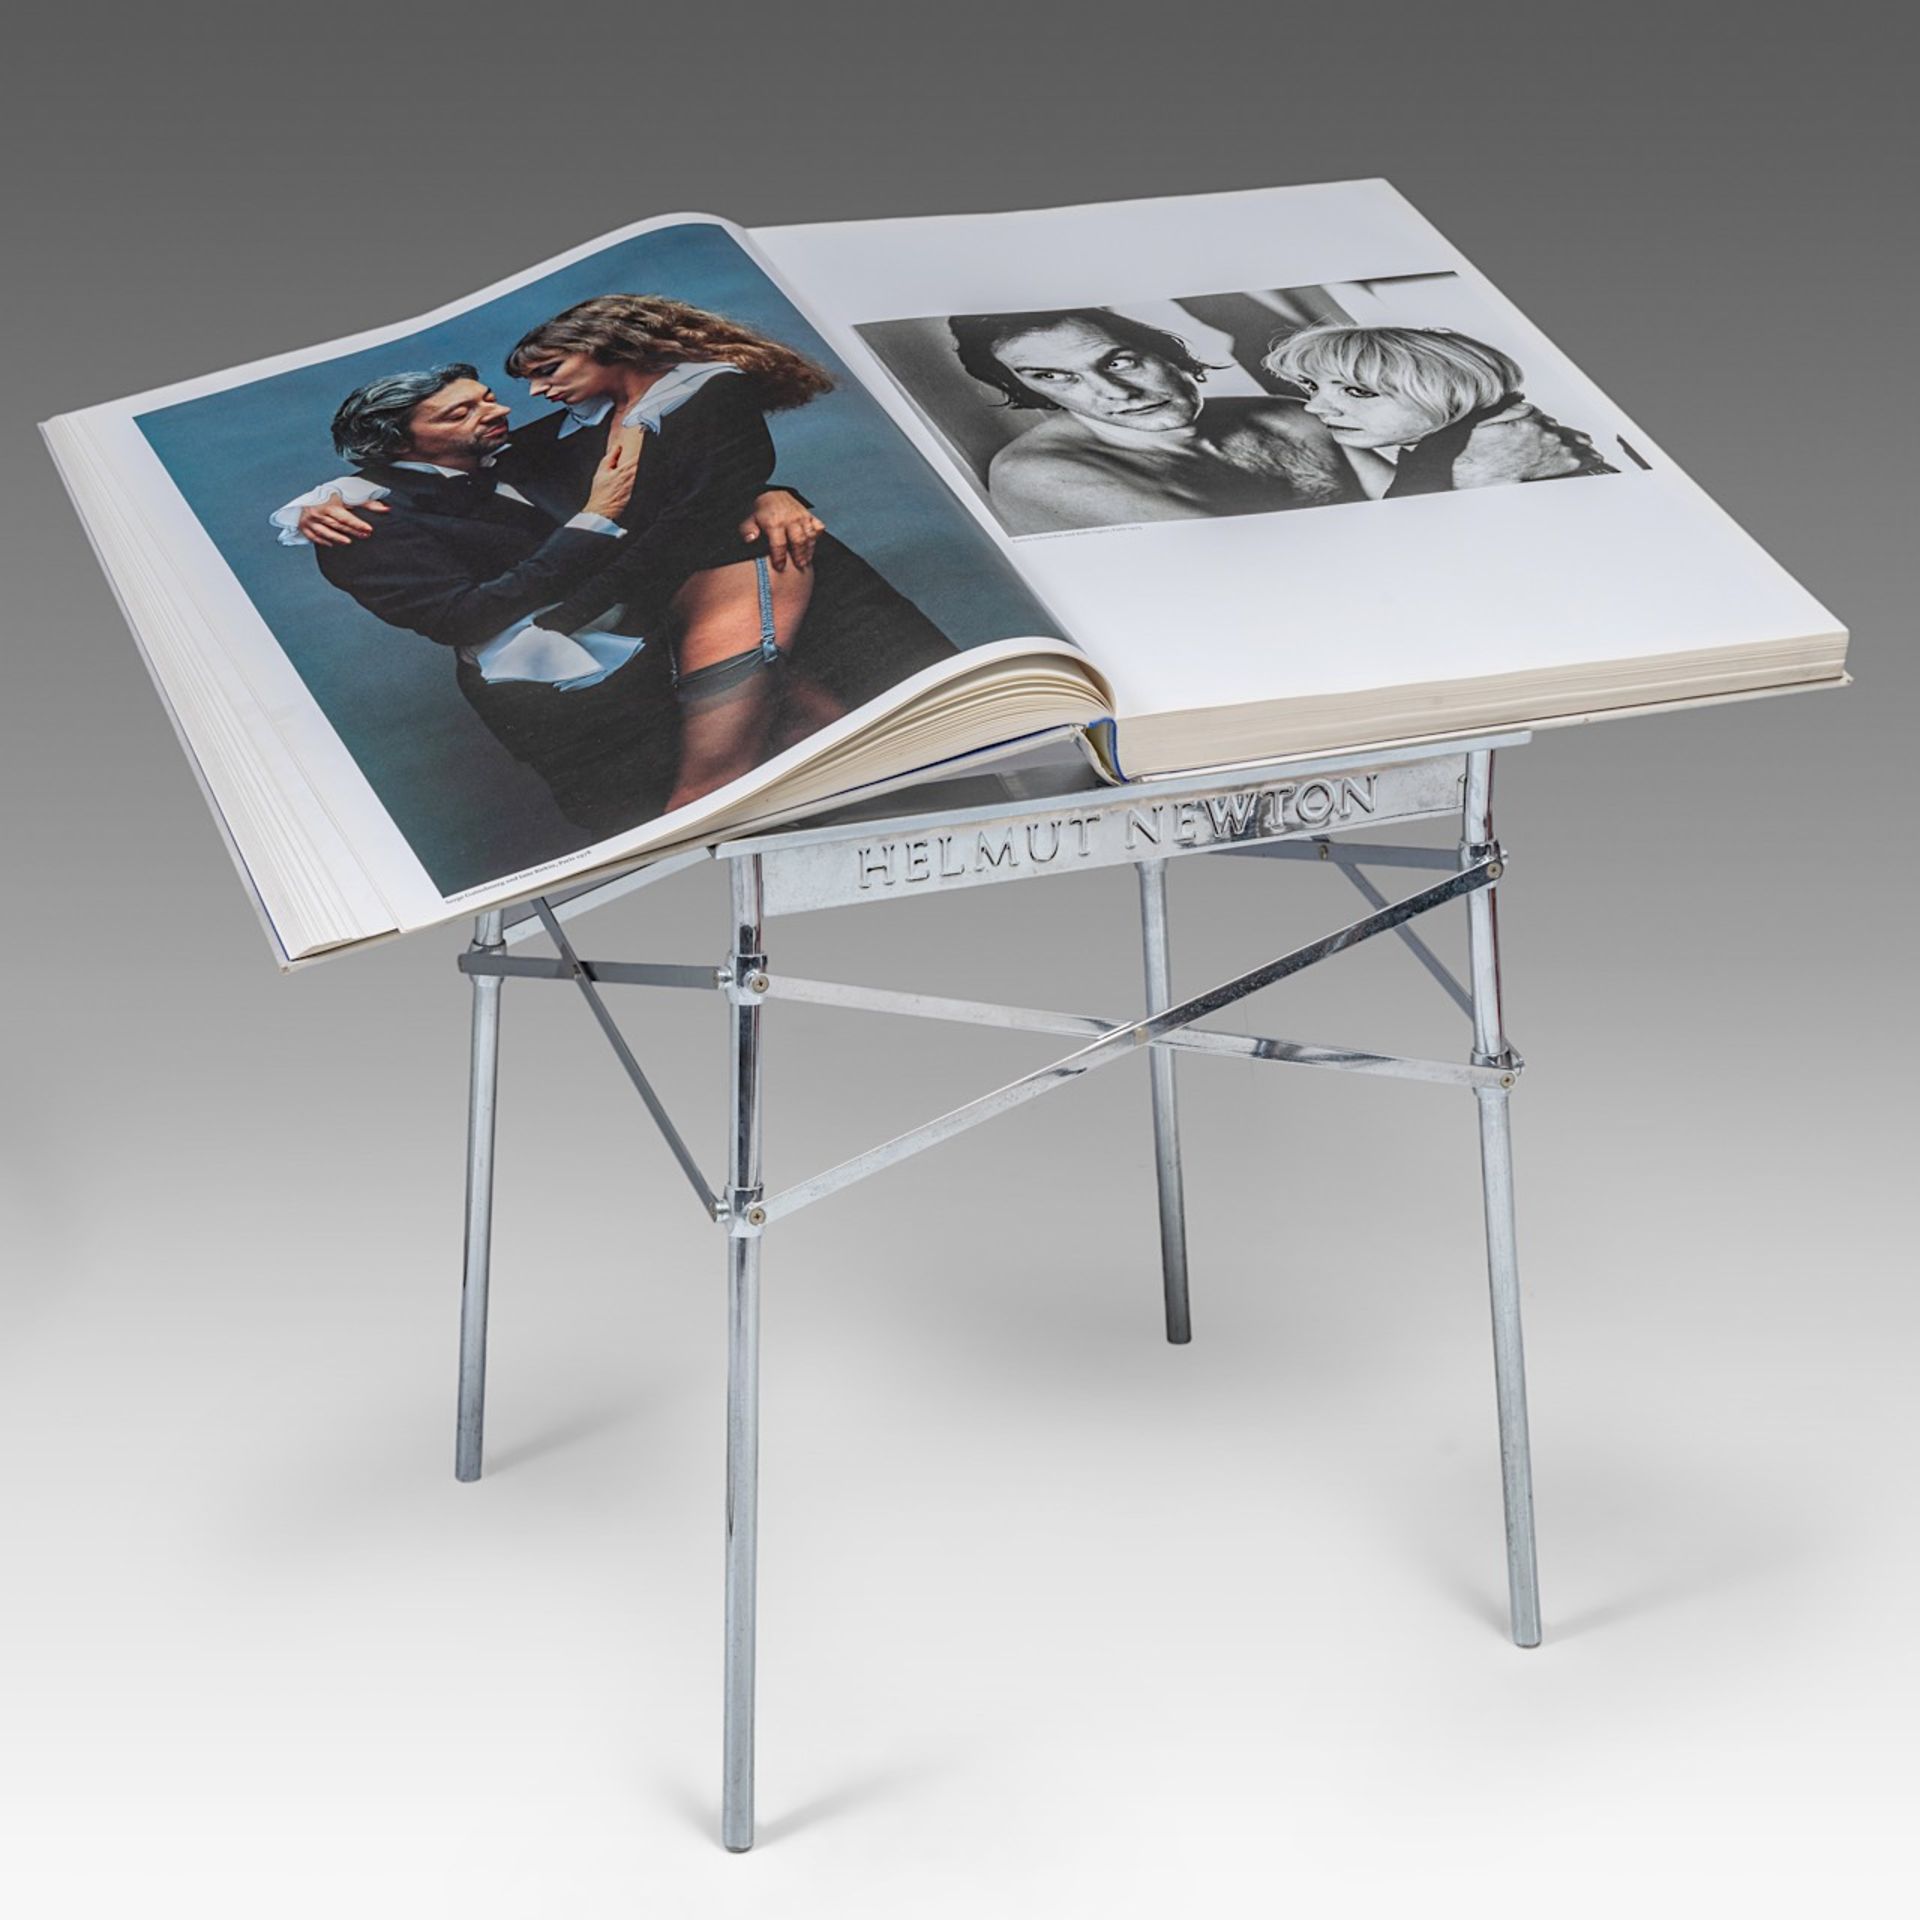 A Helmut Newton 'Sumo' book on stand, Taschen, 1999, signed and numbered - Image 16 of 20